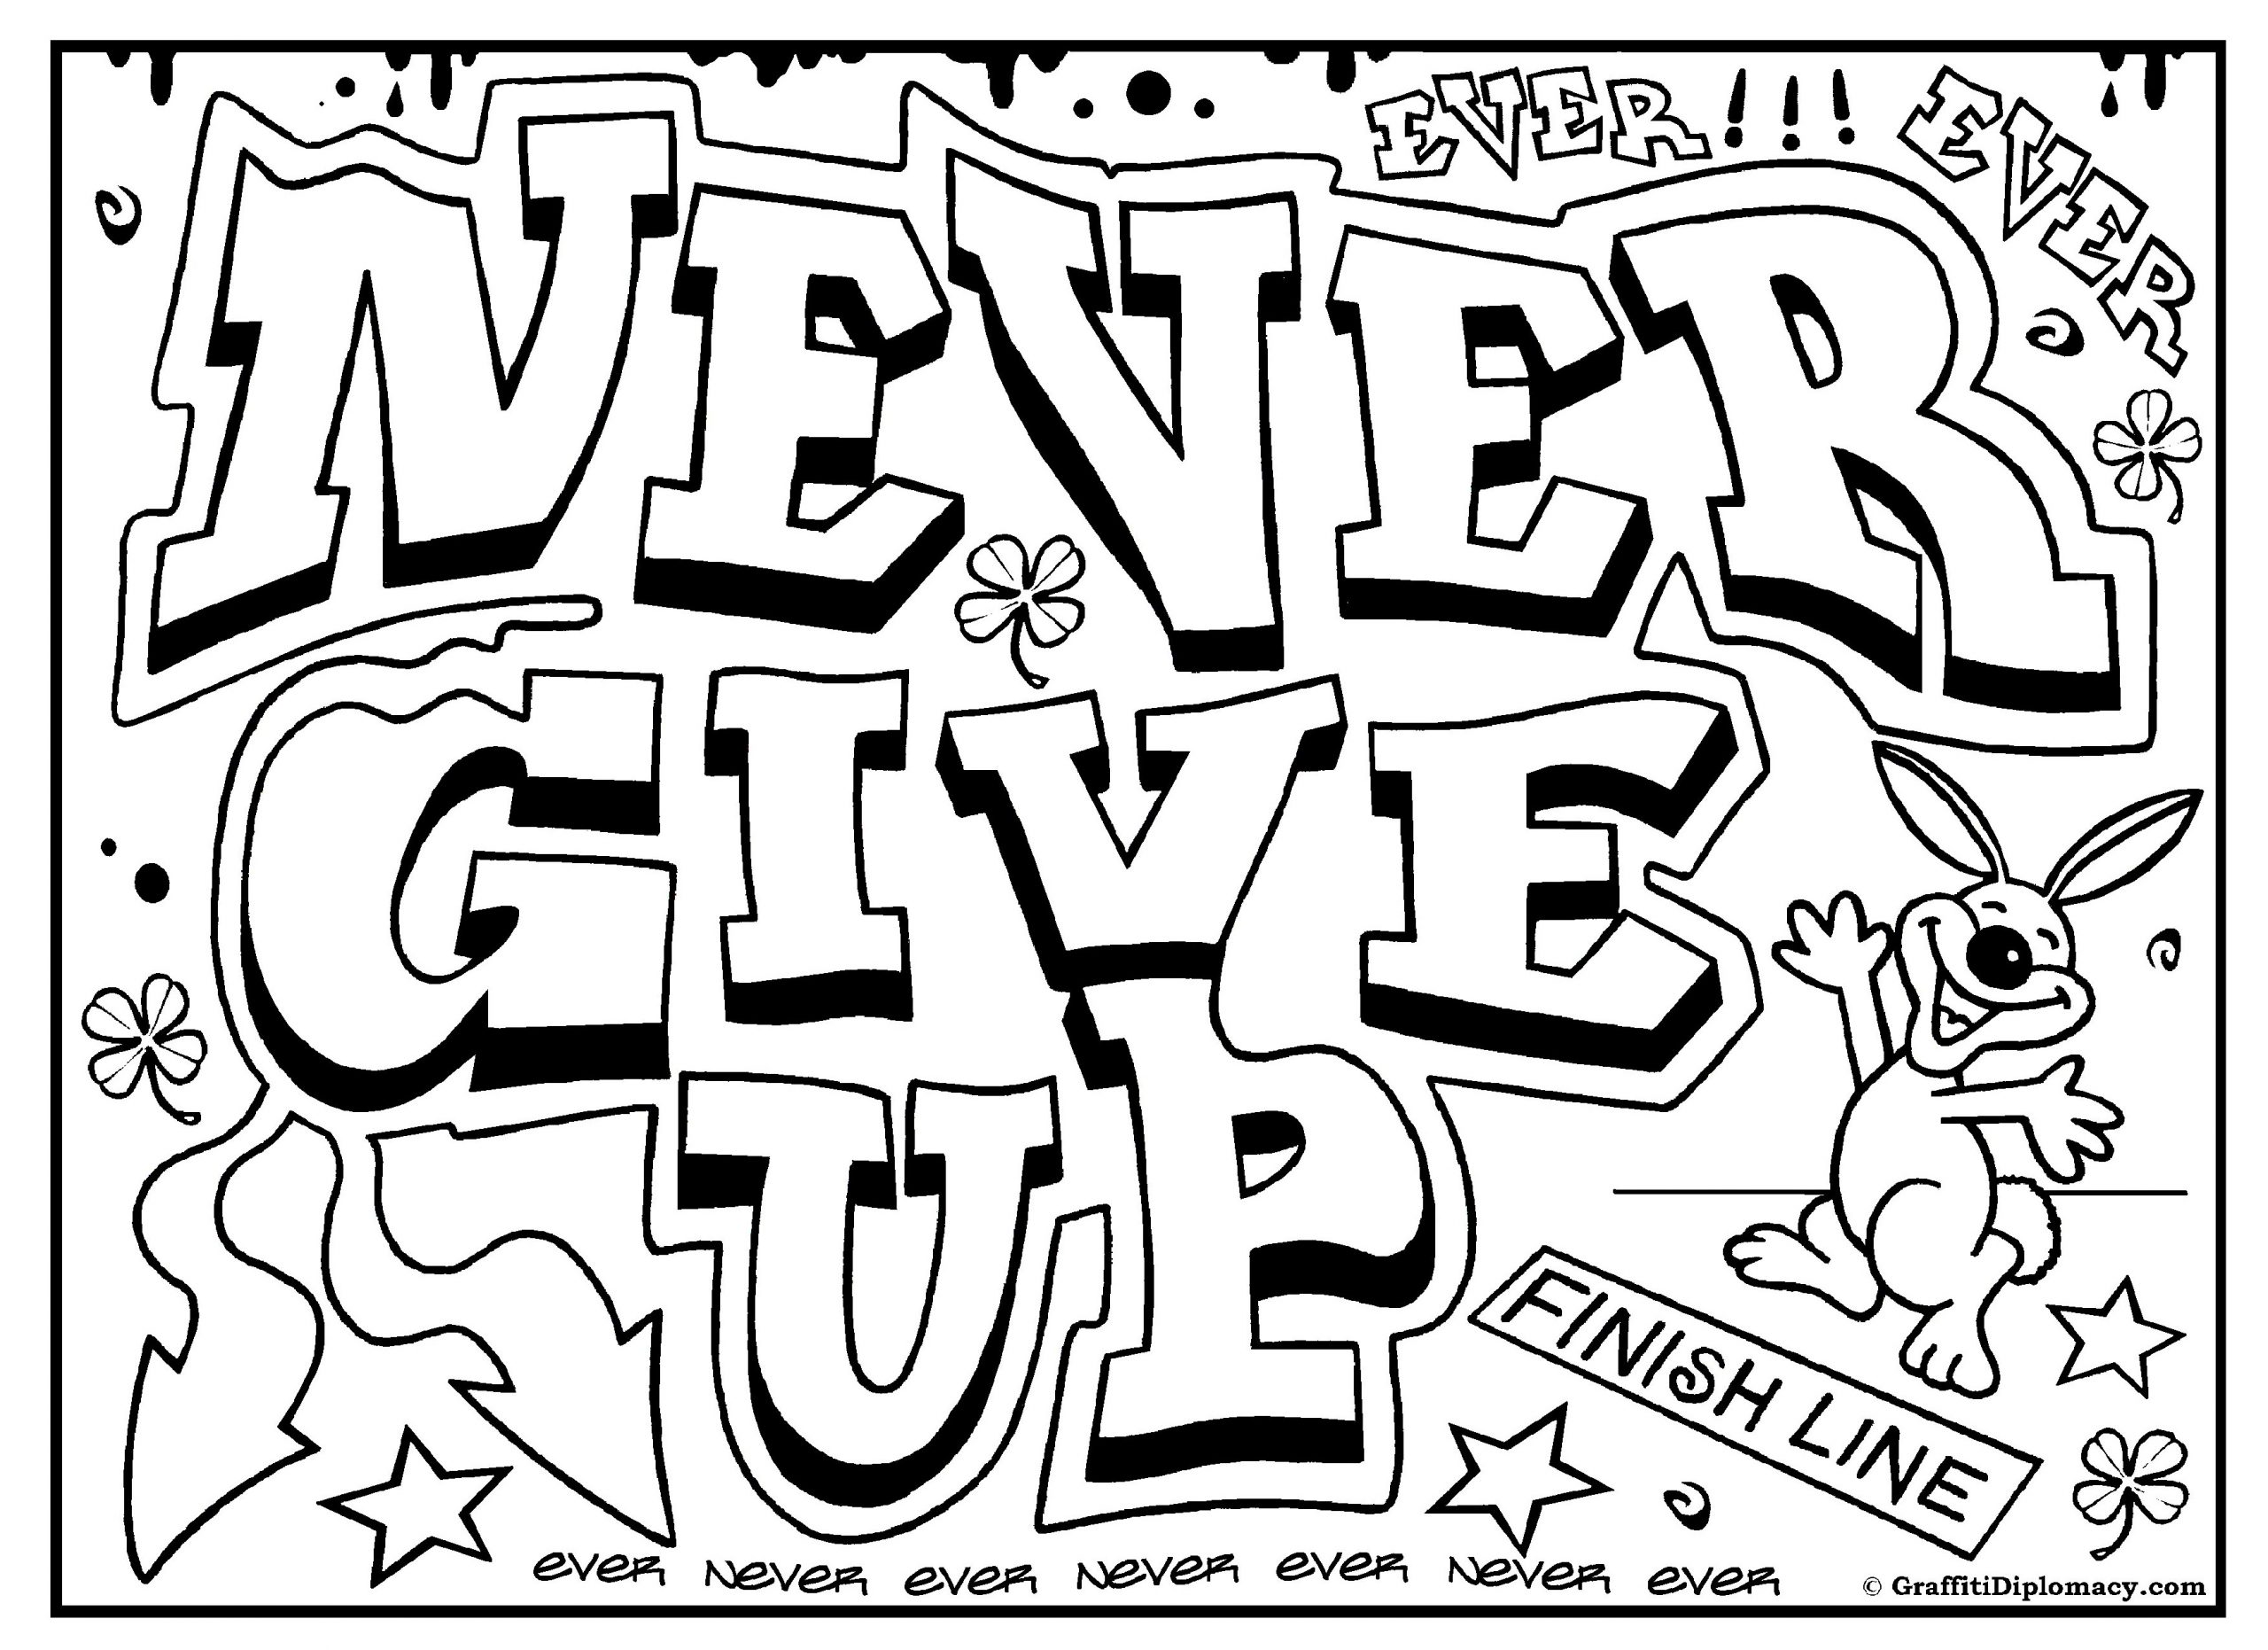 Never Give Up Coloring Page - Free Printable Coloring Pages for Kids